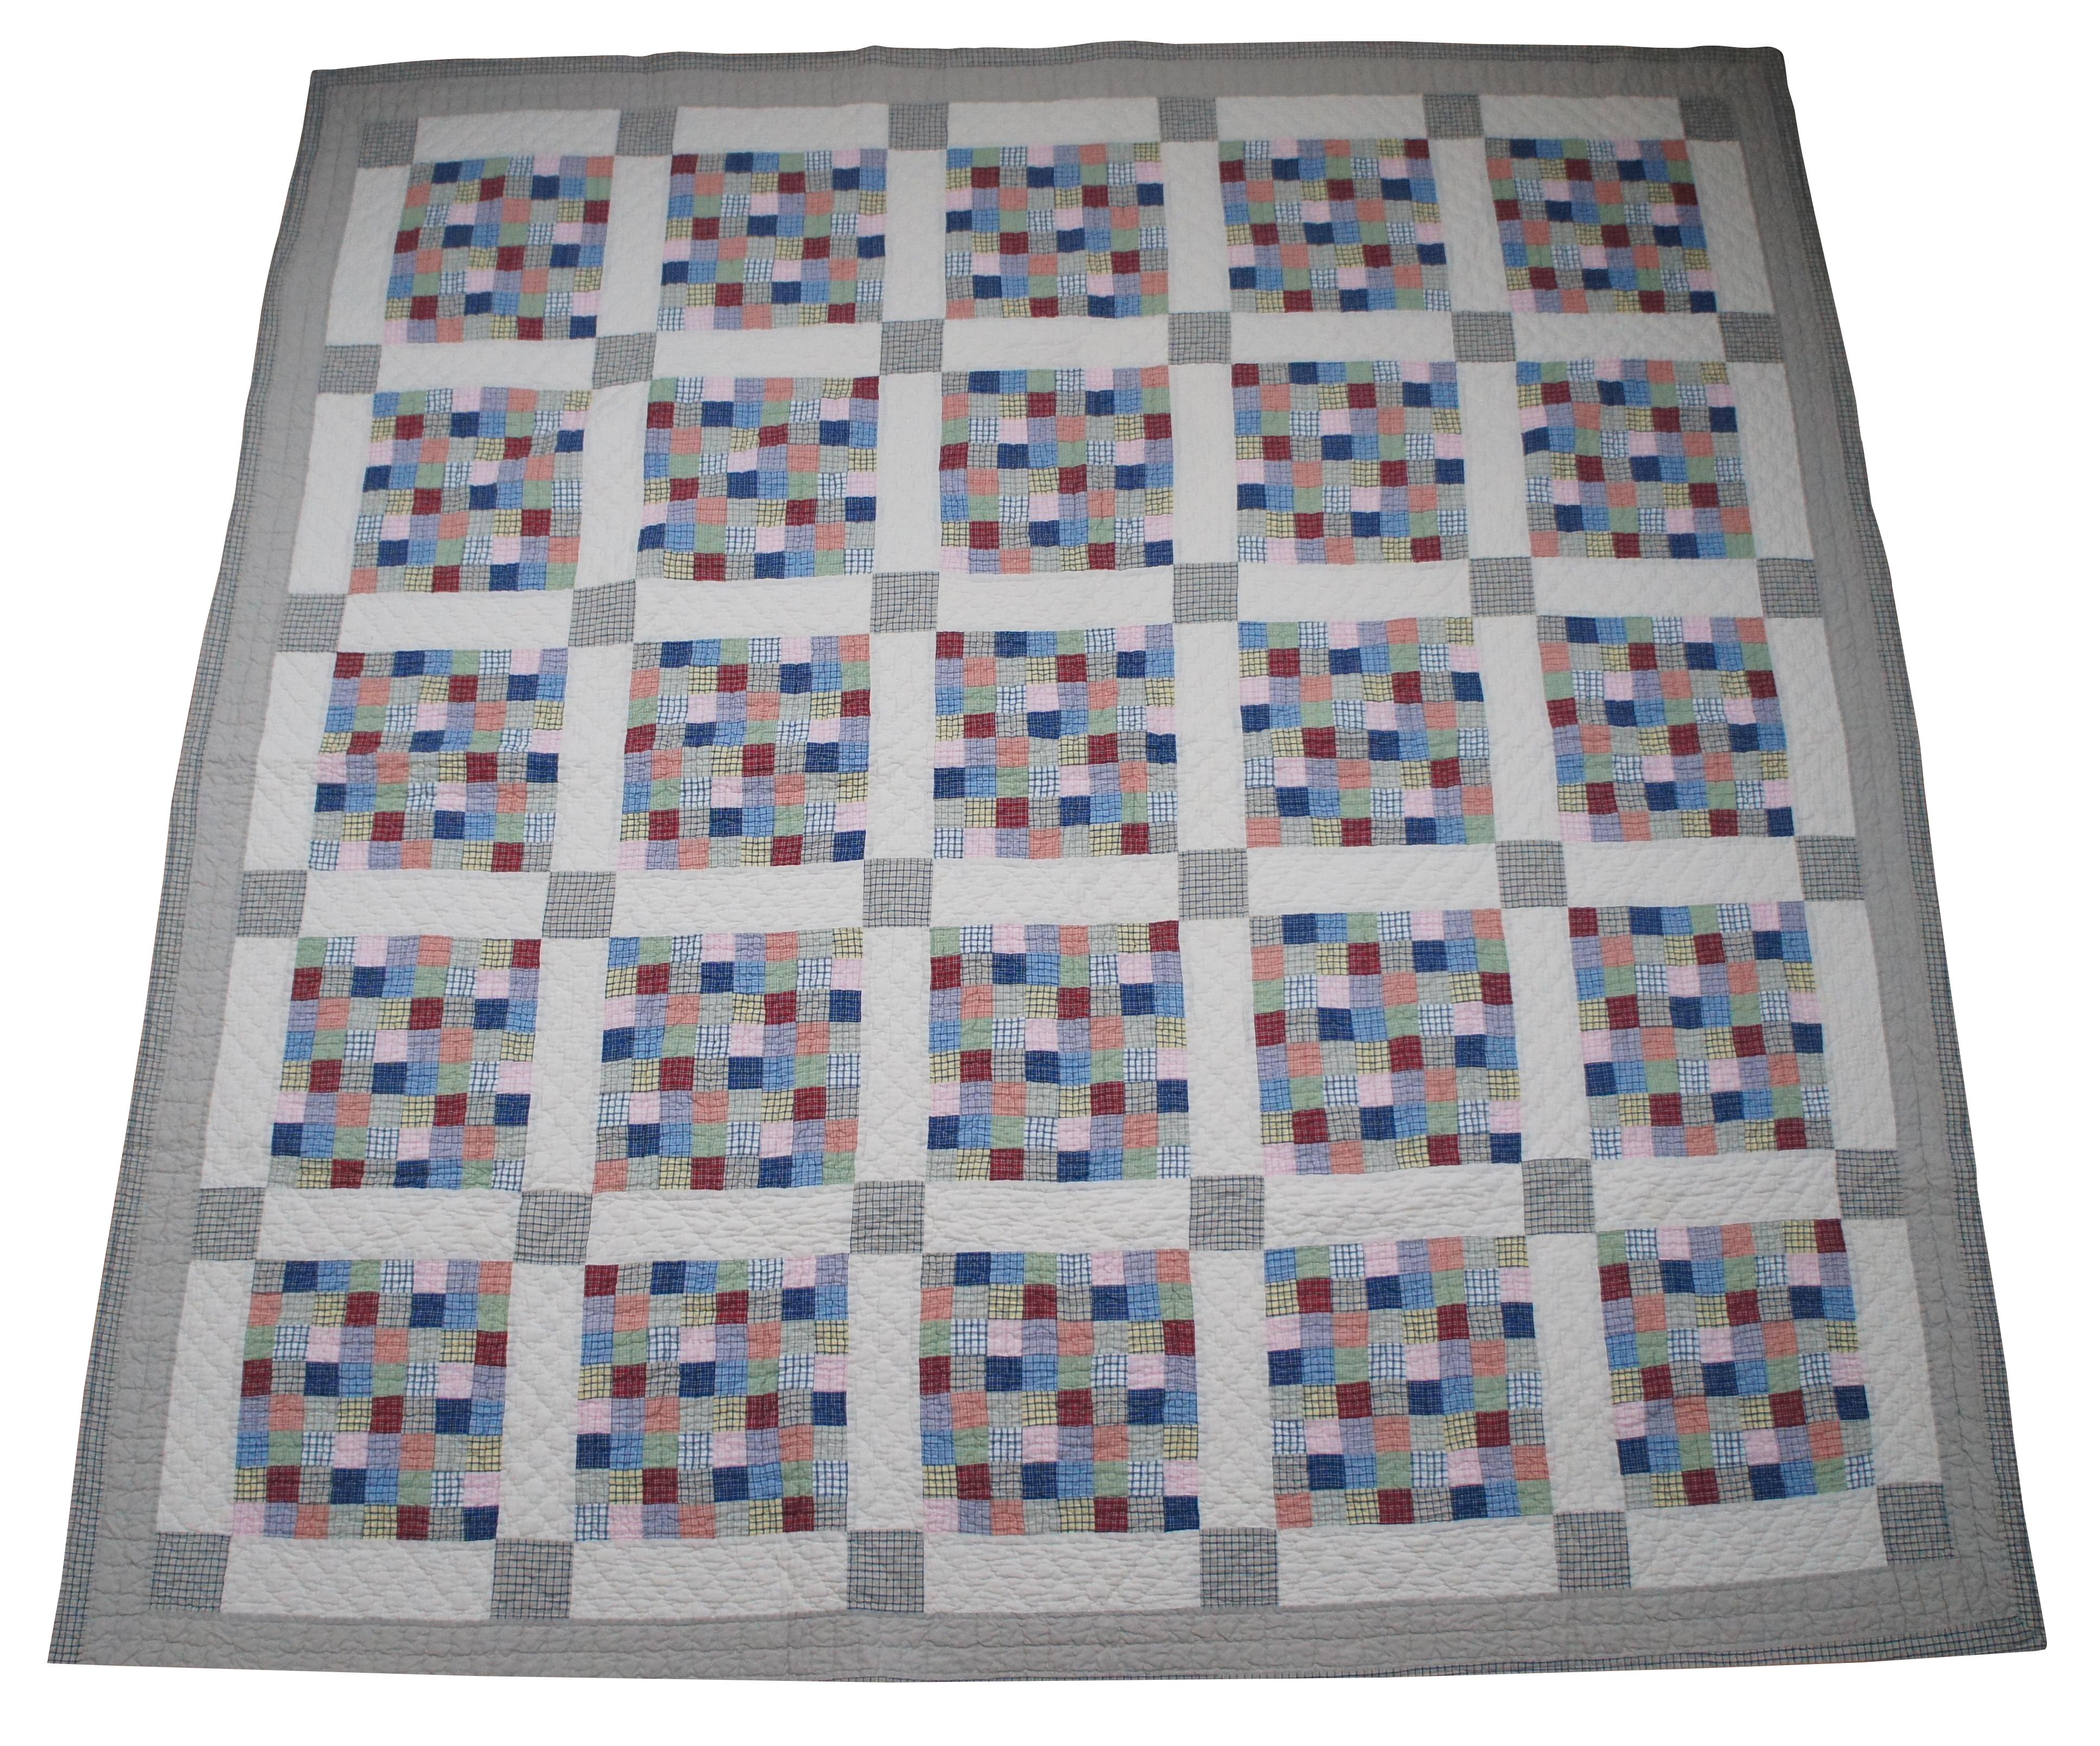 Antique hand stitched bedspread / blanket / coverlet / quilt featuring checkered geometric blocks of multicolored gingham, divided by white and gray blocks, with a gray and beige border. Measure: 86